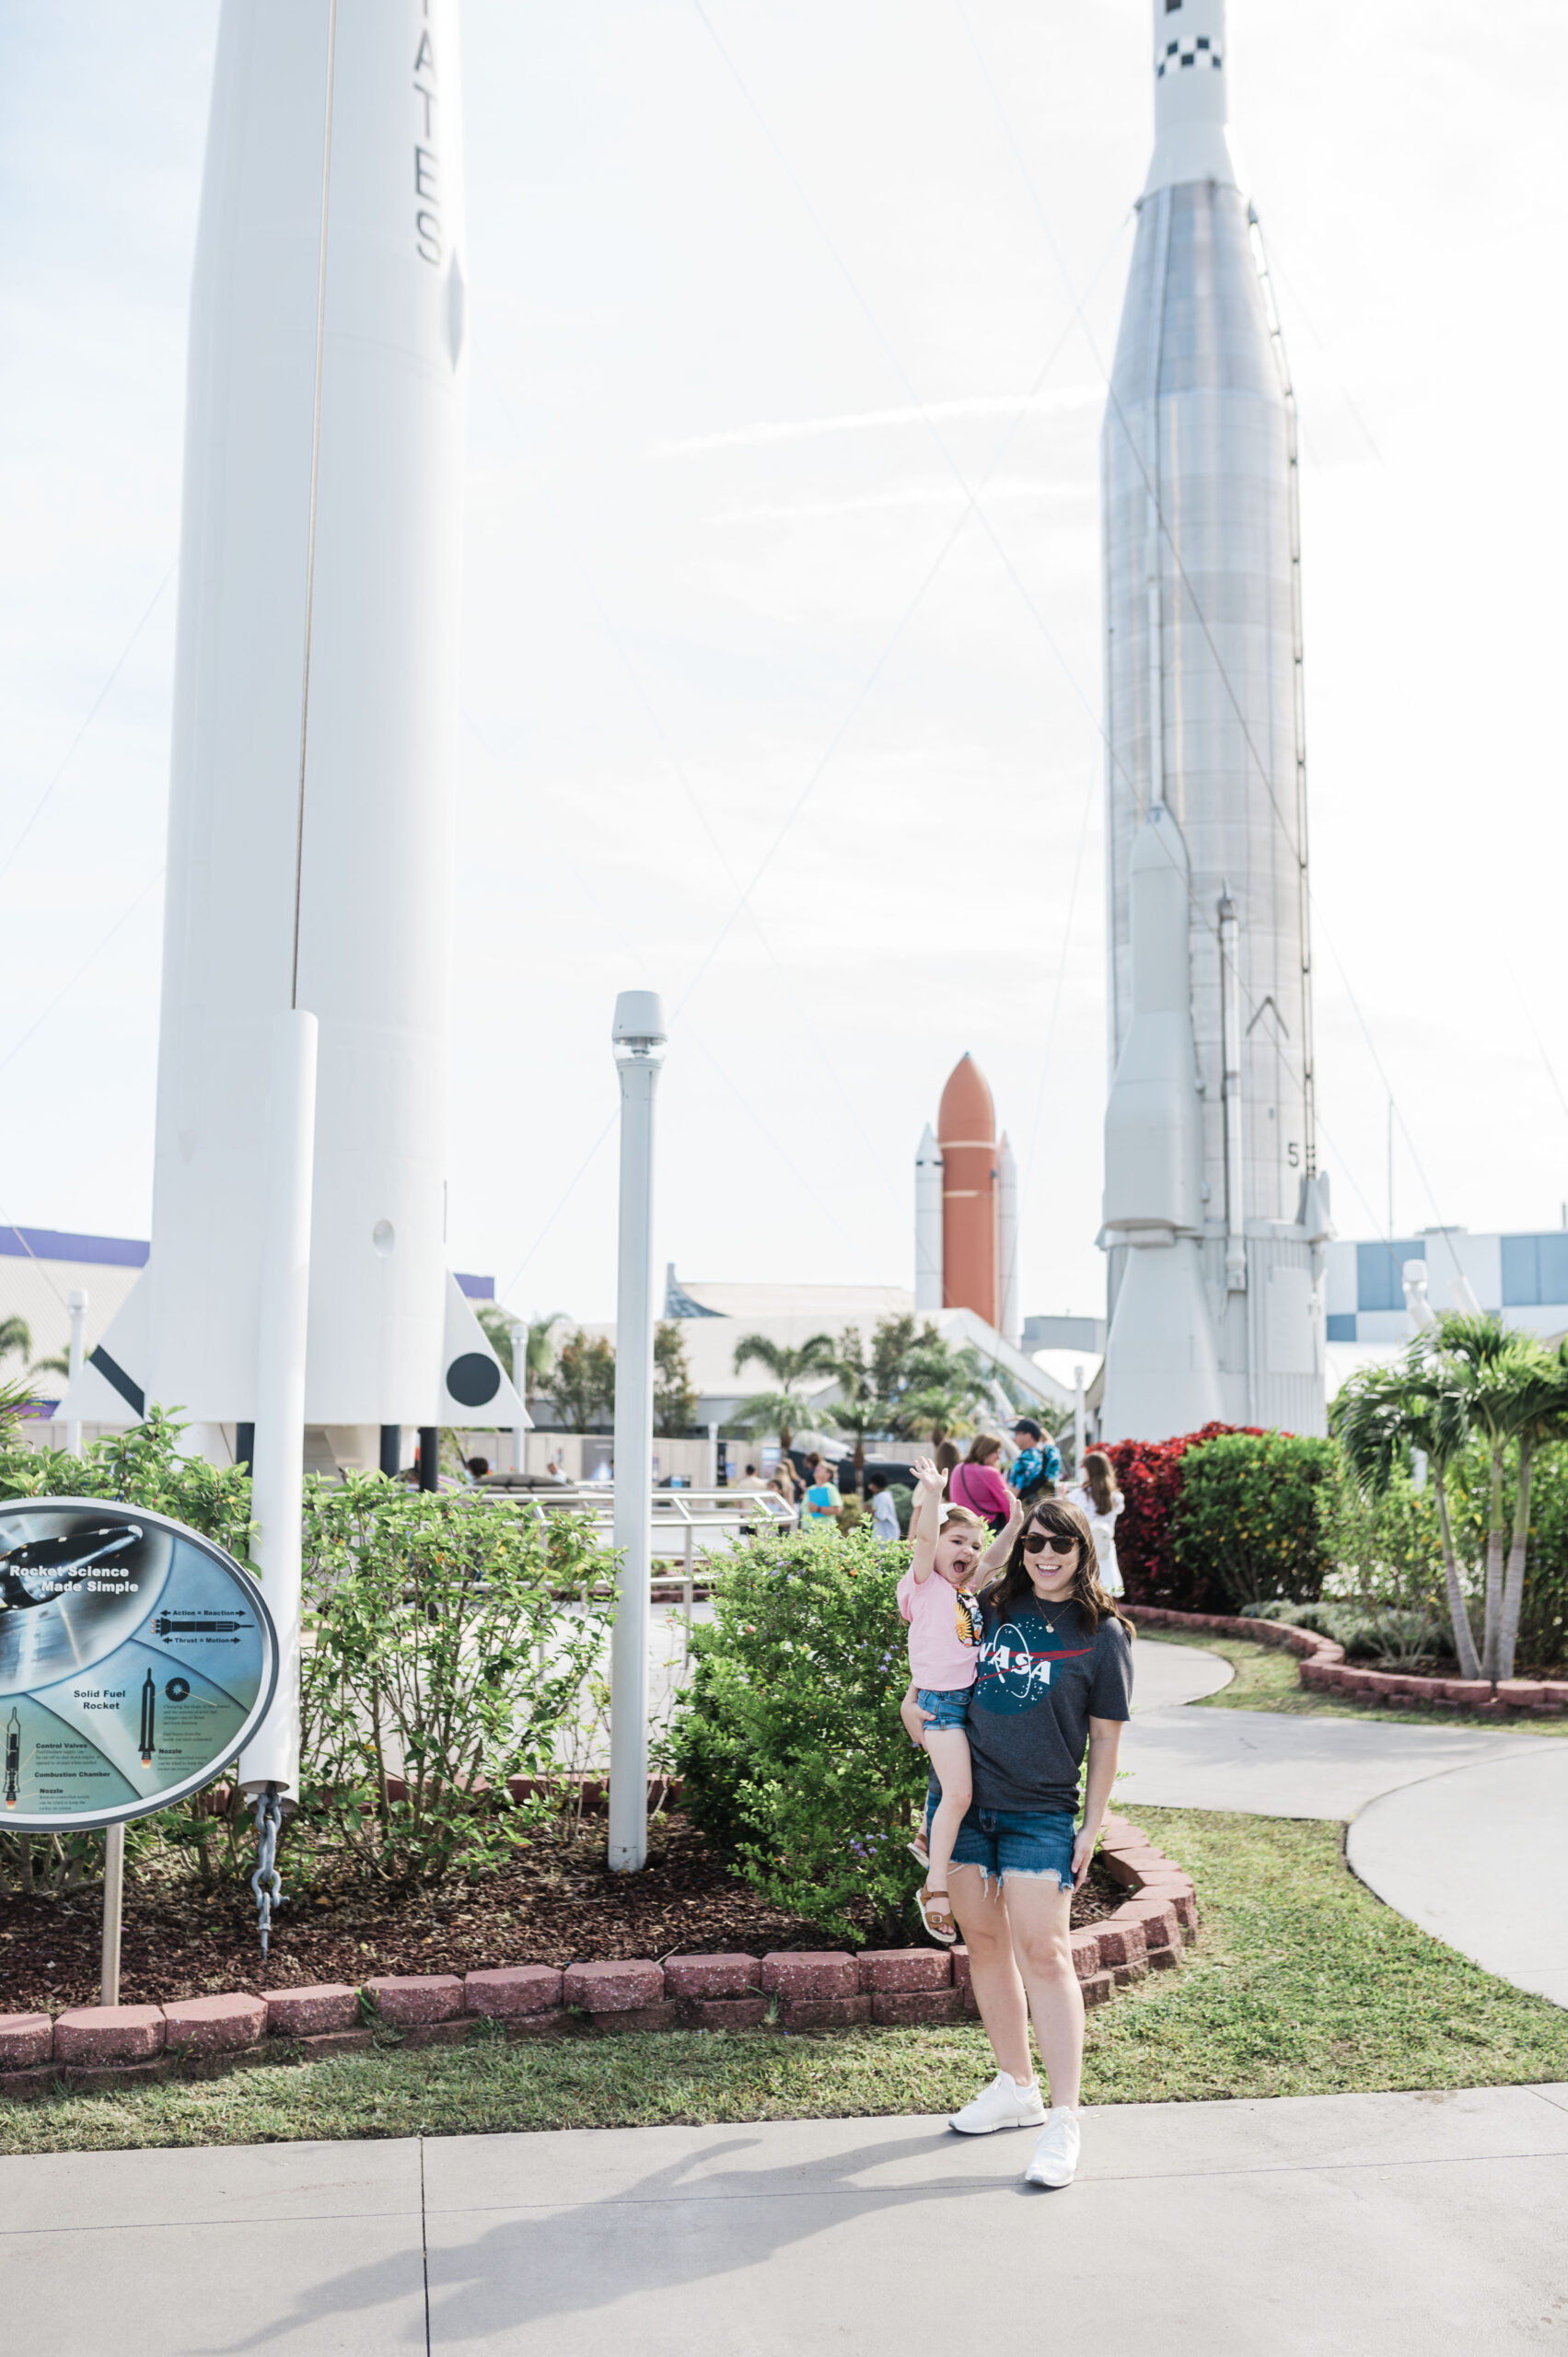 woman holding child standing in front of large rockets at the rocket garden at Kennedy Space Center in Florida